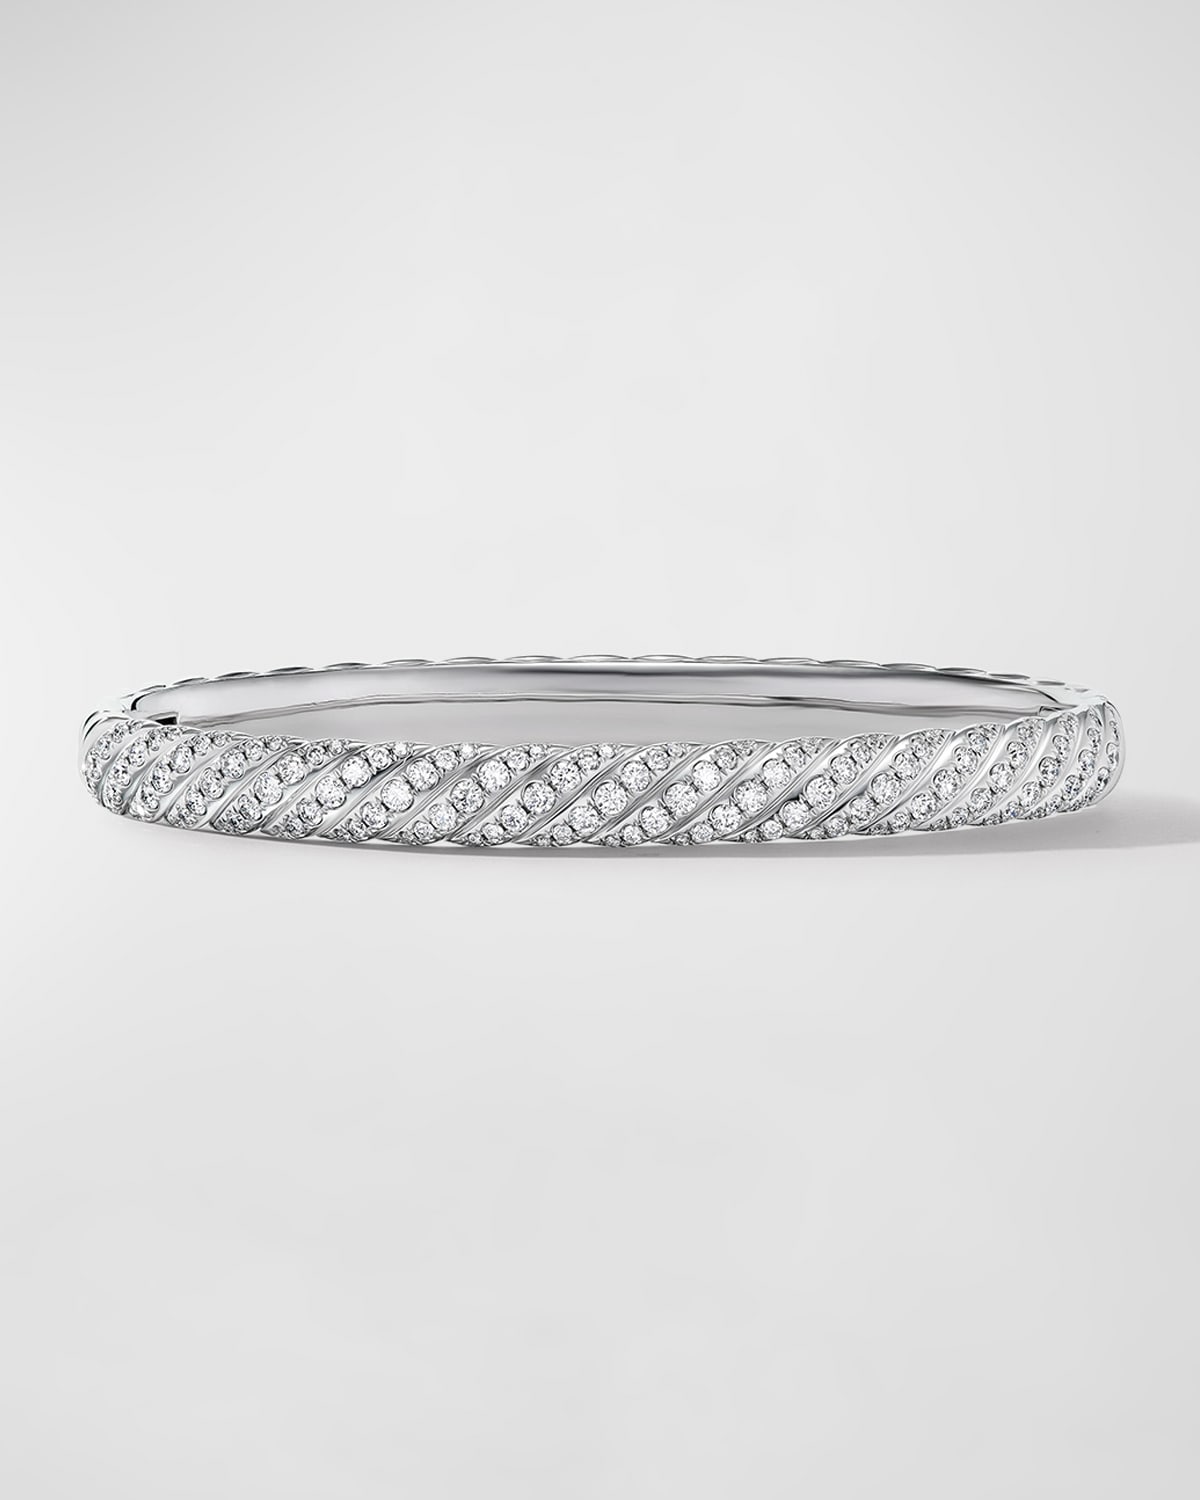 David Yurman Sculpted Cable Bracelet with Diamonds in 18K White Gold, 6mm, Size M